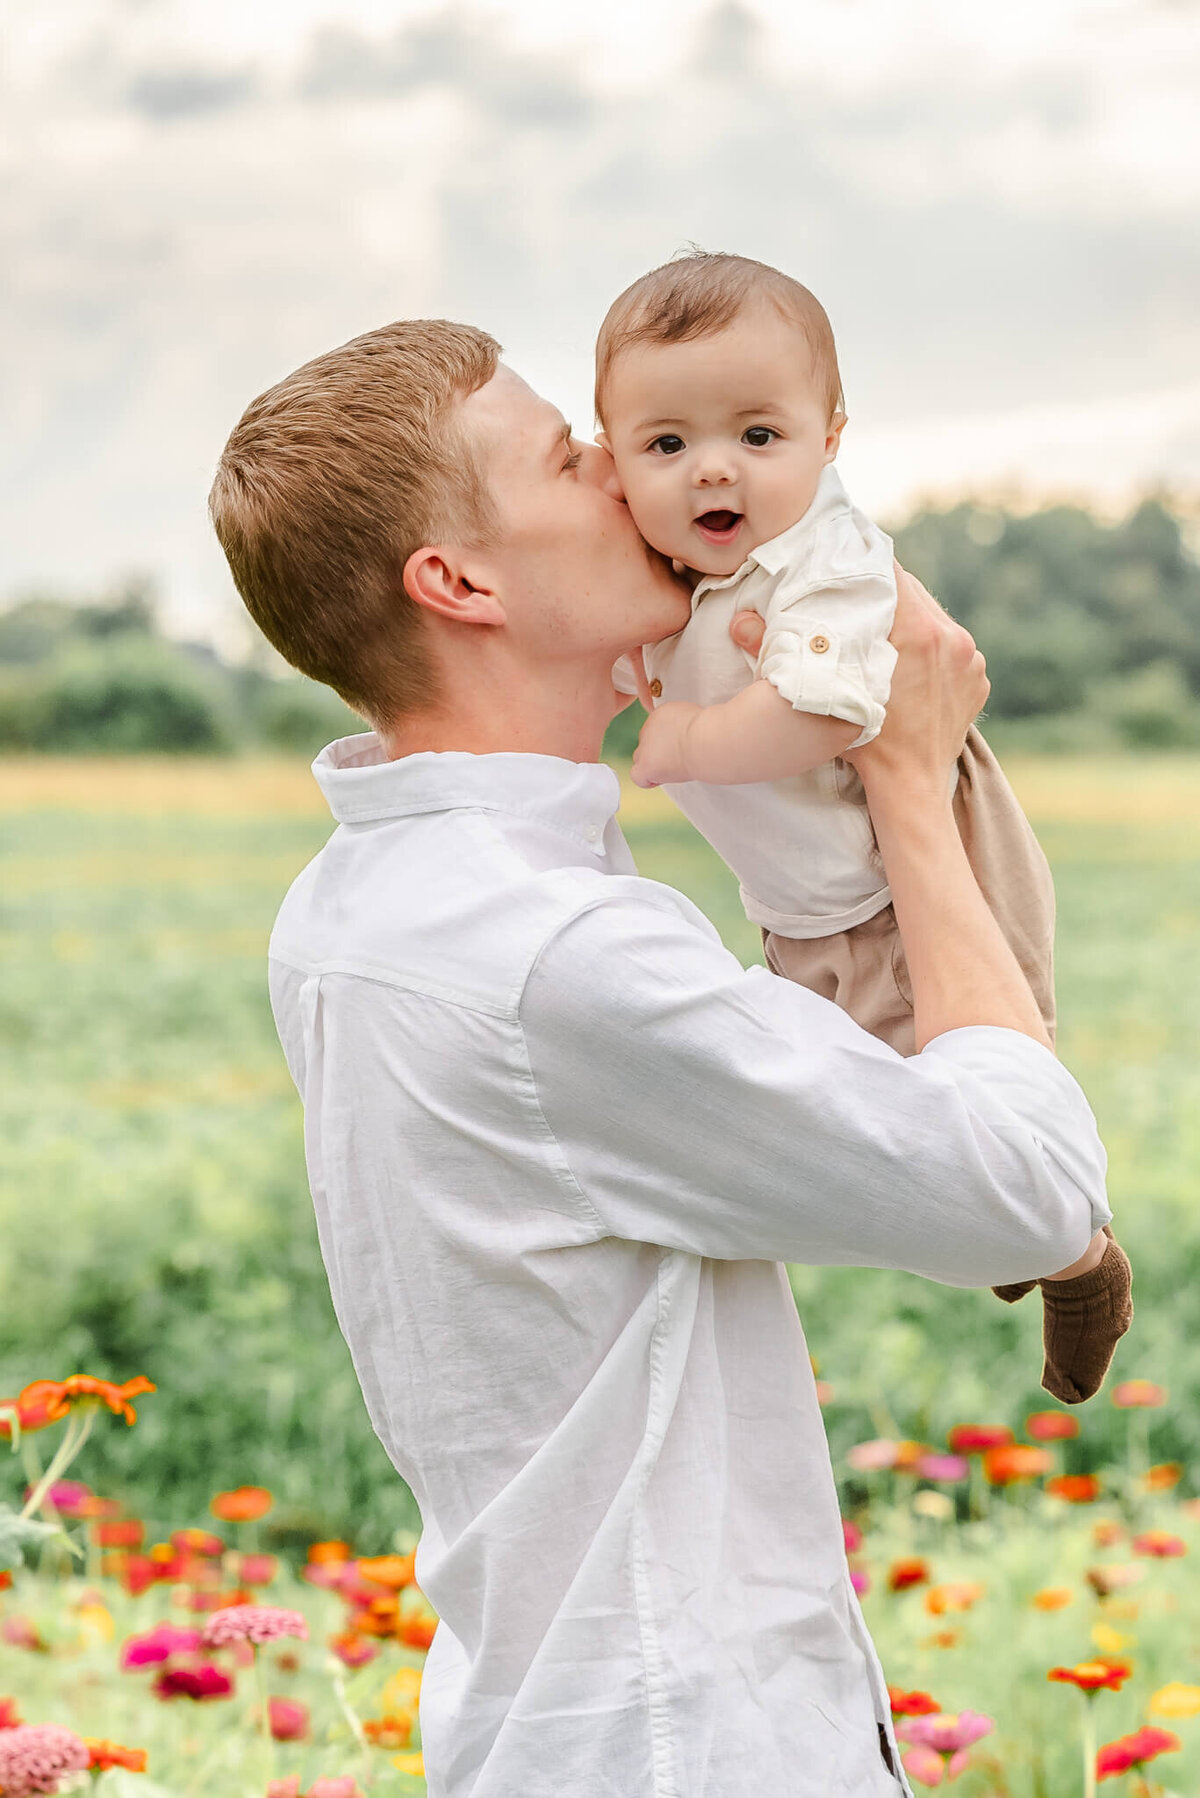 A man wearing a white shirt holds up his infant son and gives him a kiss on the cheek. Image by Justine Renee Photography in Norfolk, VA.